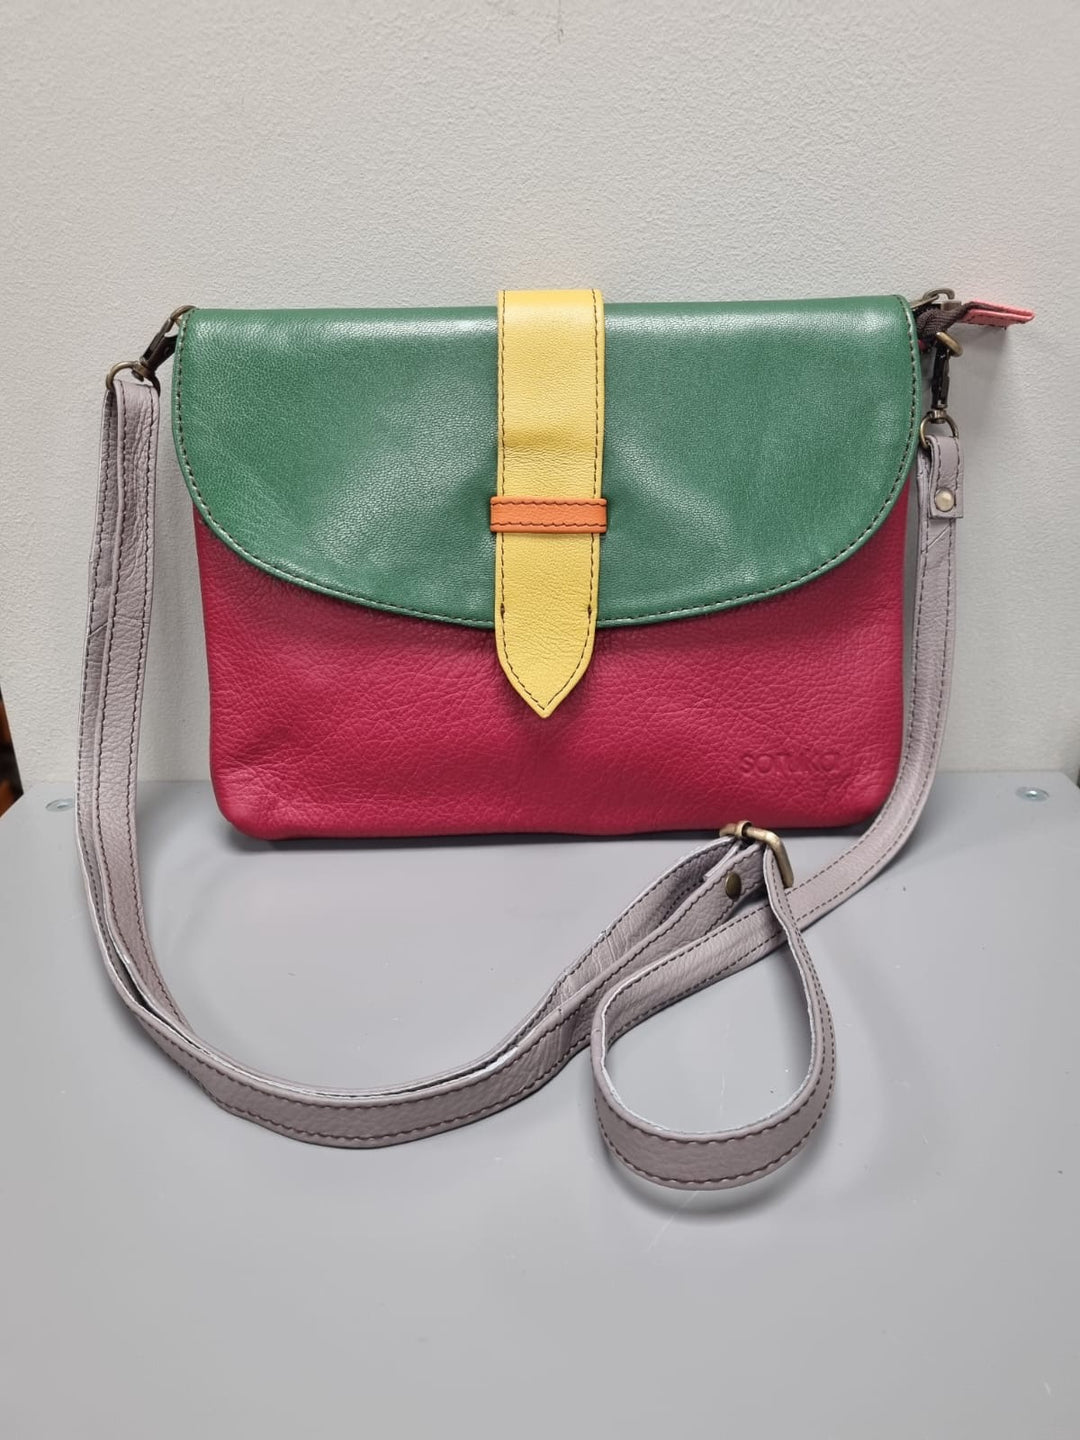 Saddle Cross Body Bag -Red And Green Leather